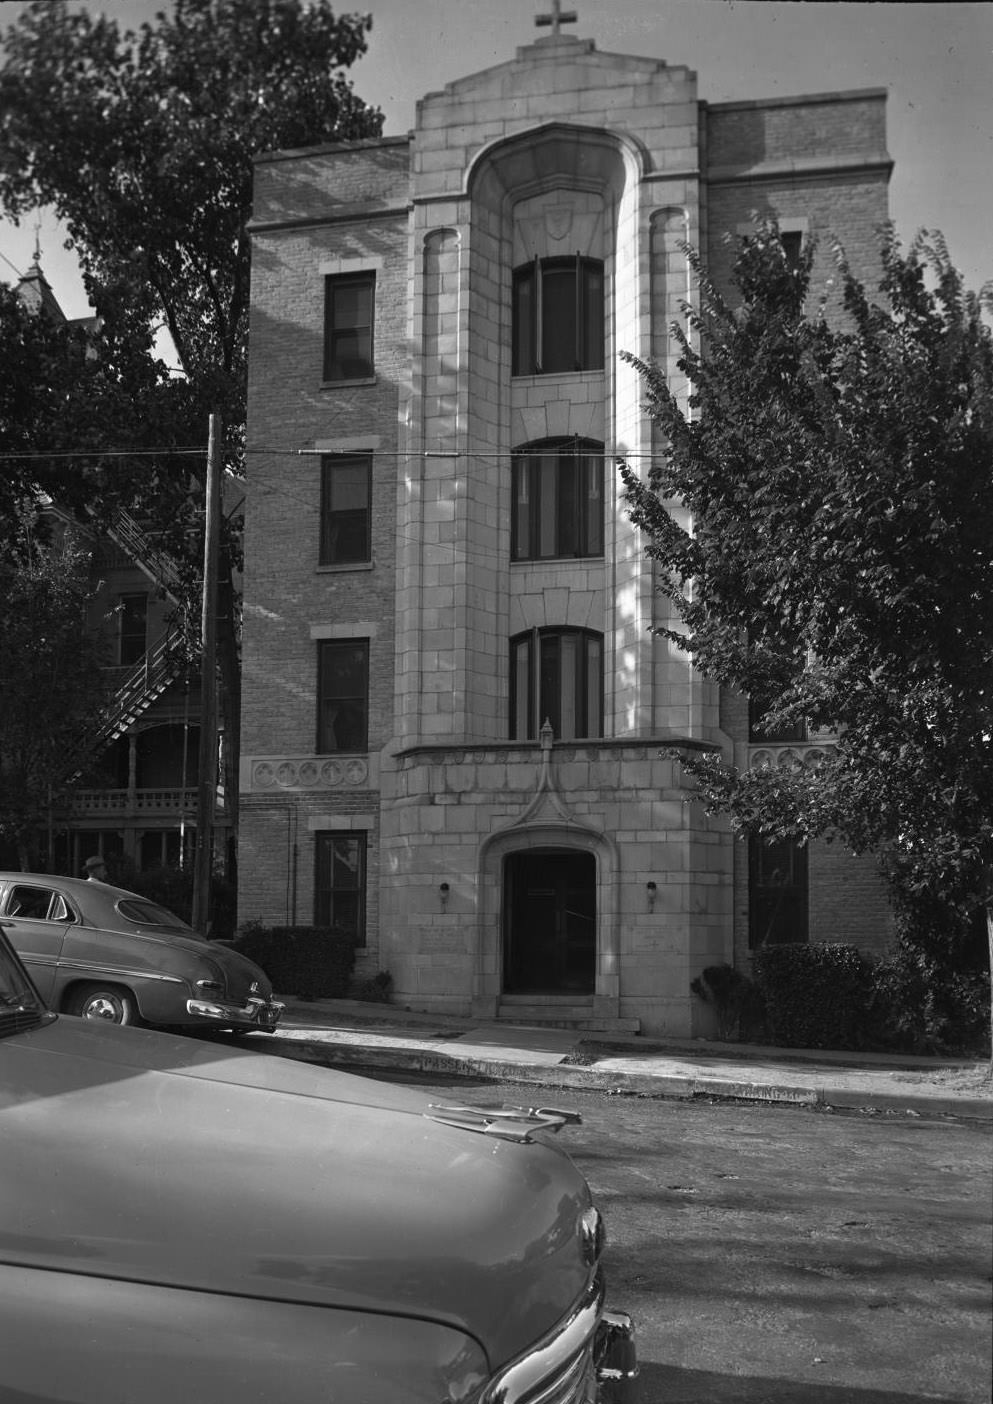 Exterior View of St. David's Hospital on 606 W. 17th Street, 1950.